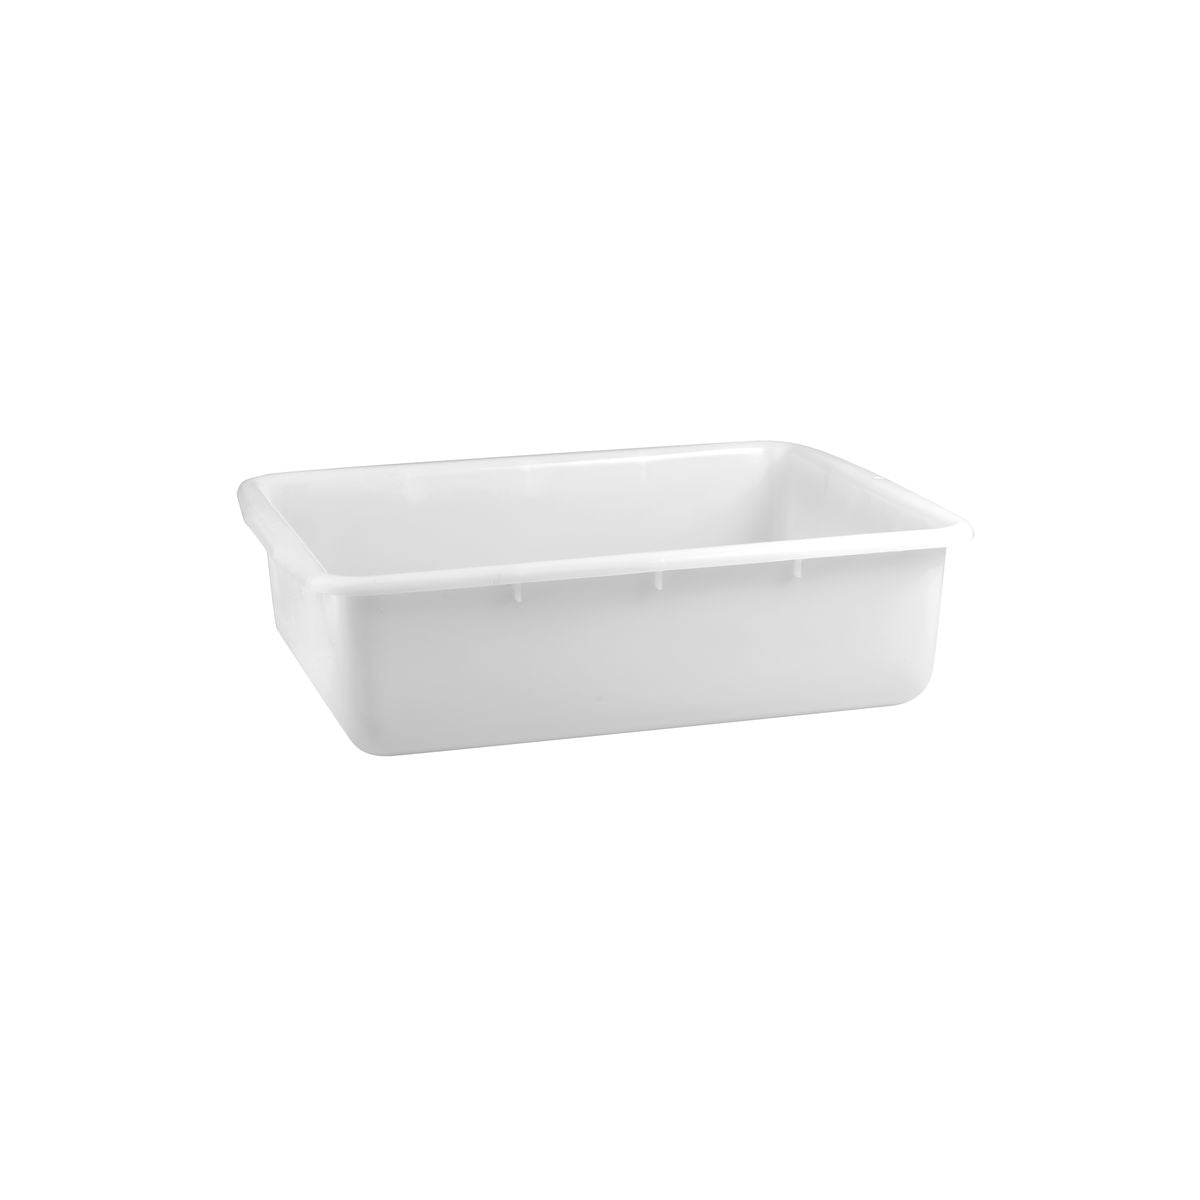 Tote Box-Plastic, White, 500X380X145Mm from Trenton. made out of Plastic and sold in boxes of 1. Hospitality quality at wholesale price with The Flying Fork! 